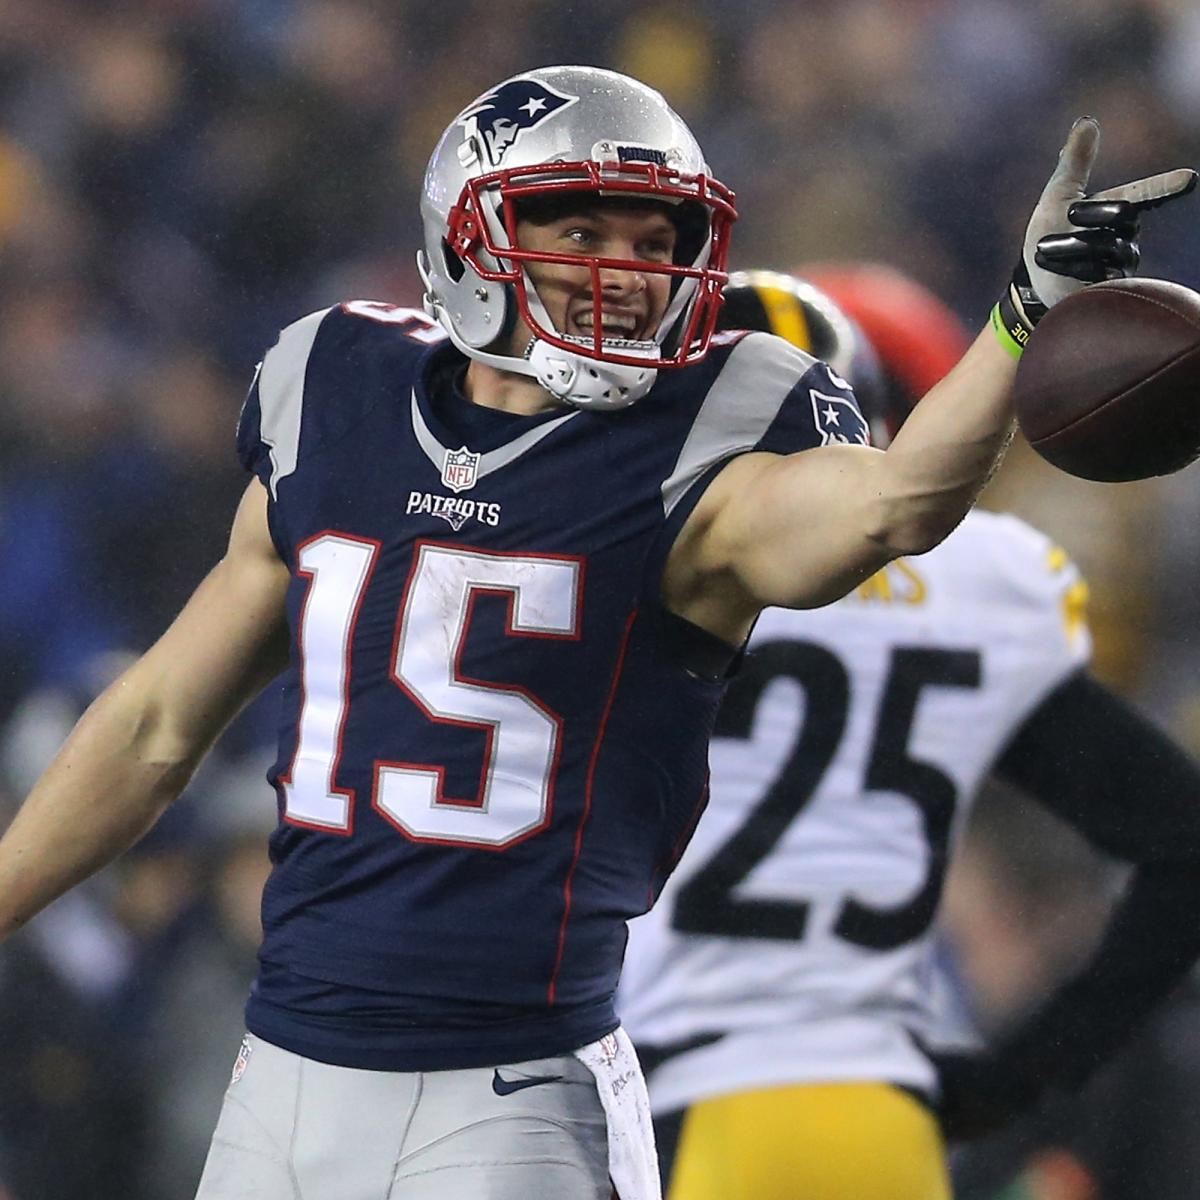 Chris Hogan Records Most Receiving Yards Postseason Game by Undrafted Player Bleacher Report | Latest Videos Highlights